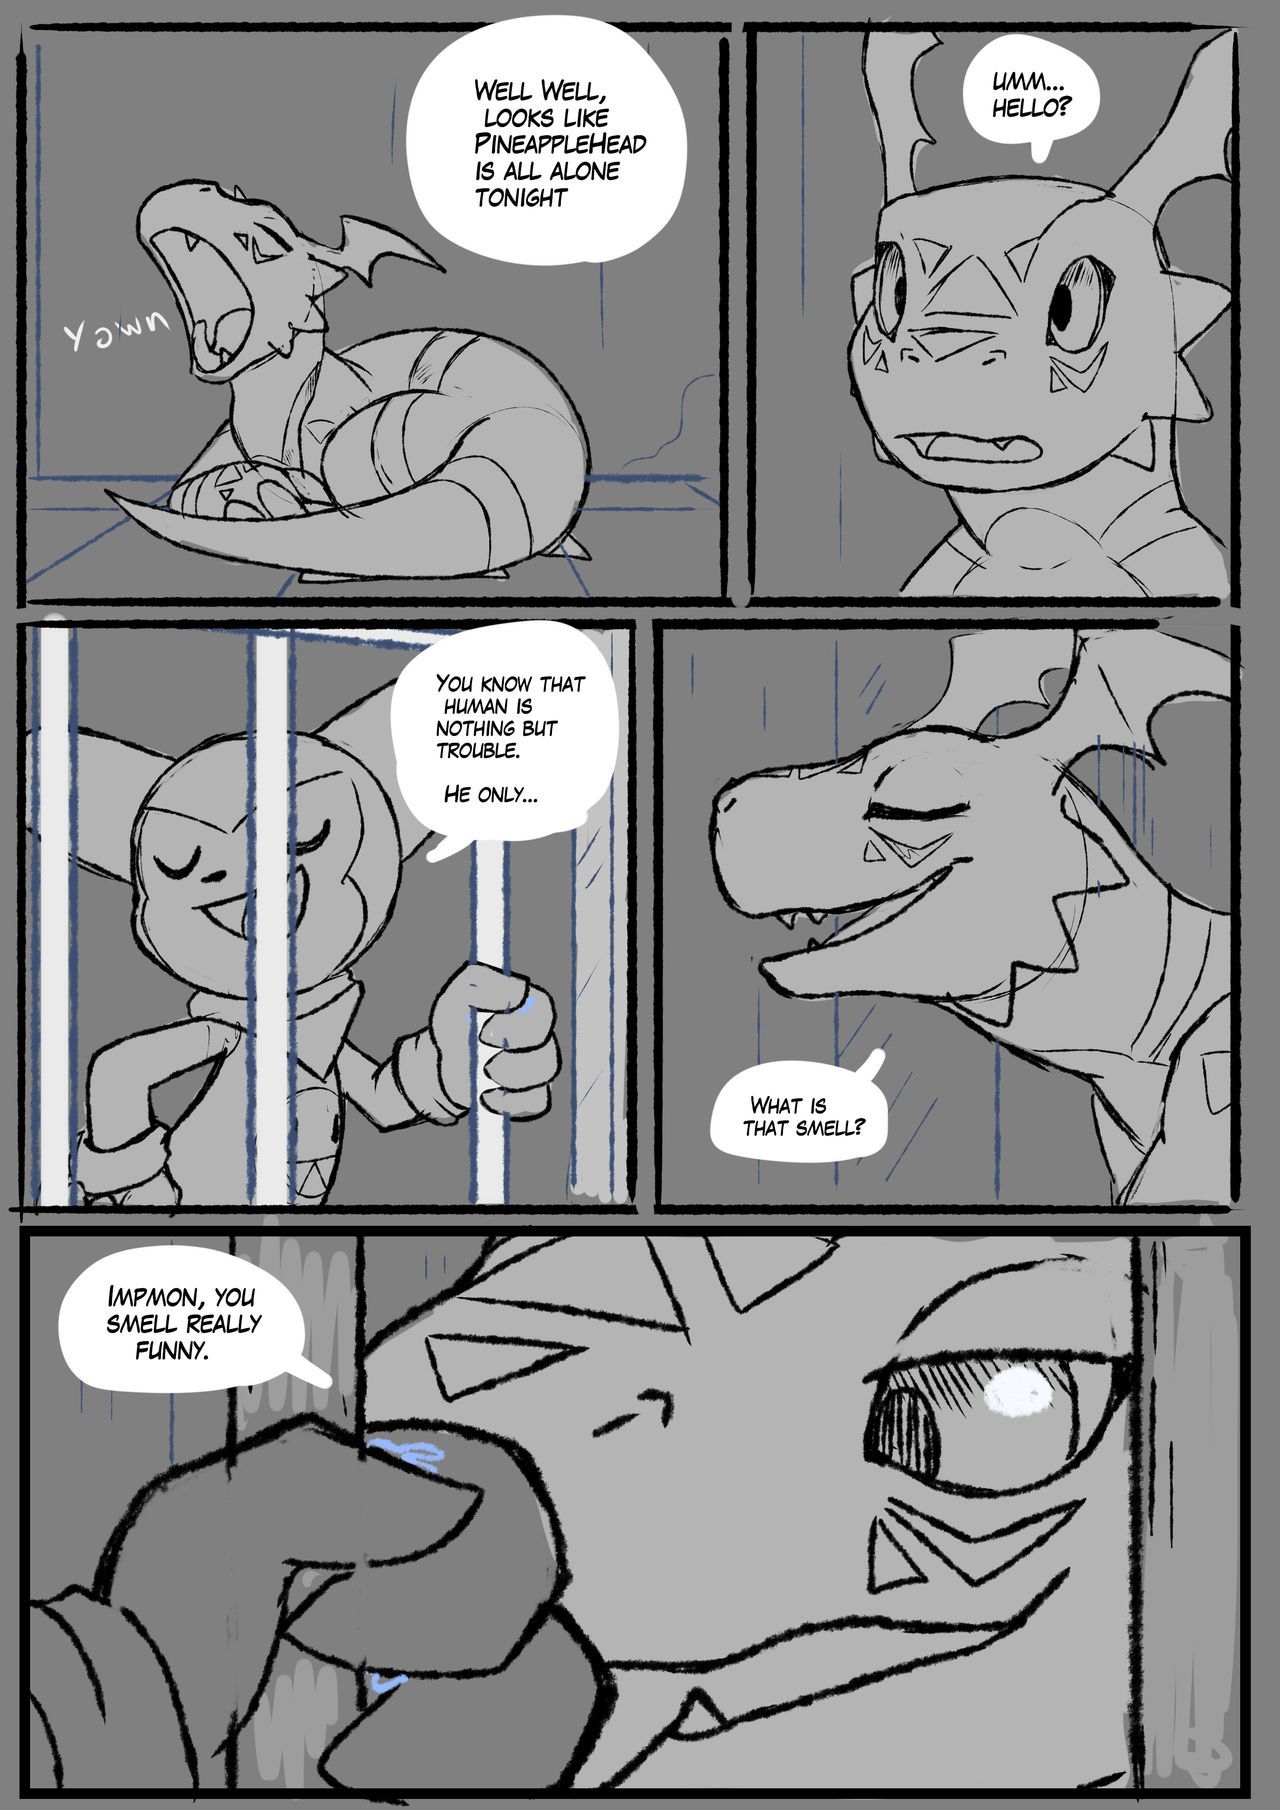 An inexperienced Guilmon by blitzdrachin page 2